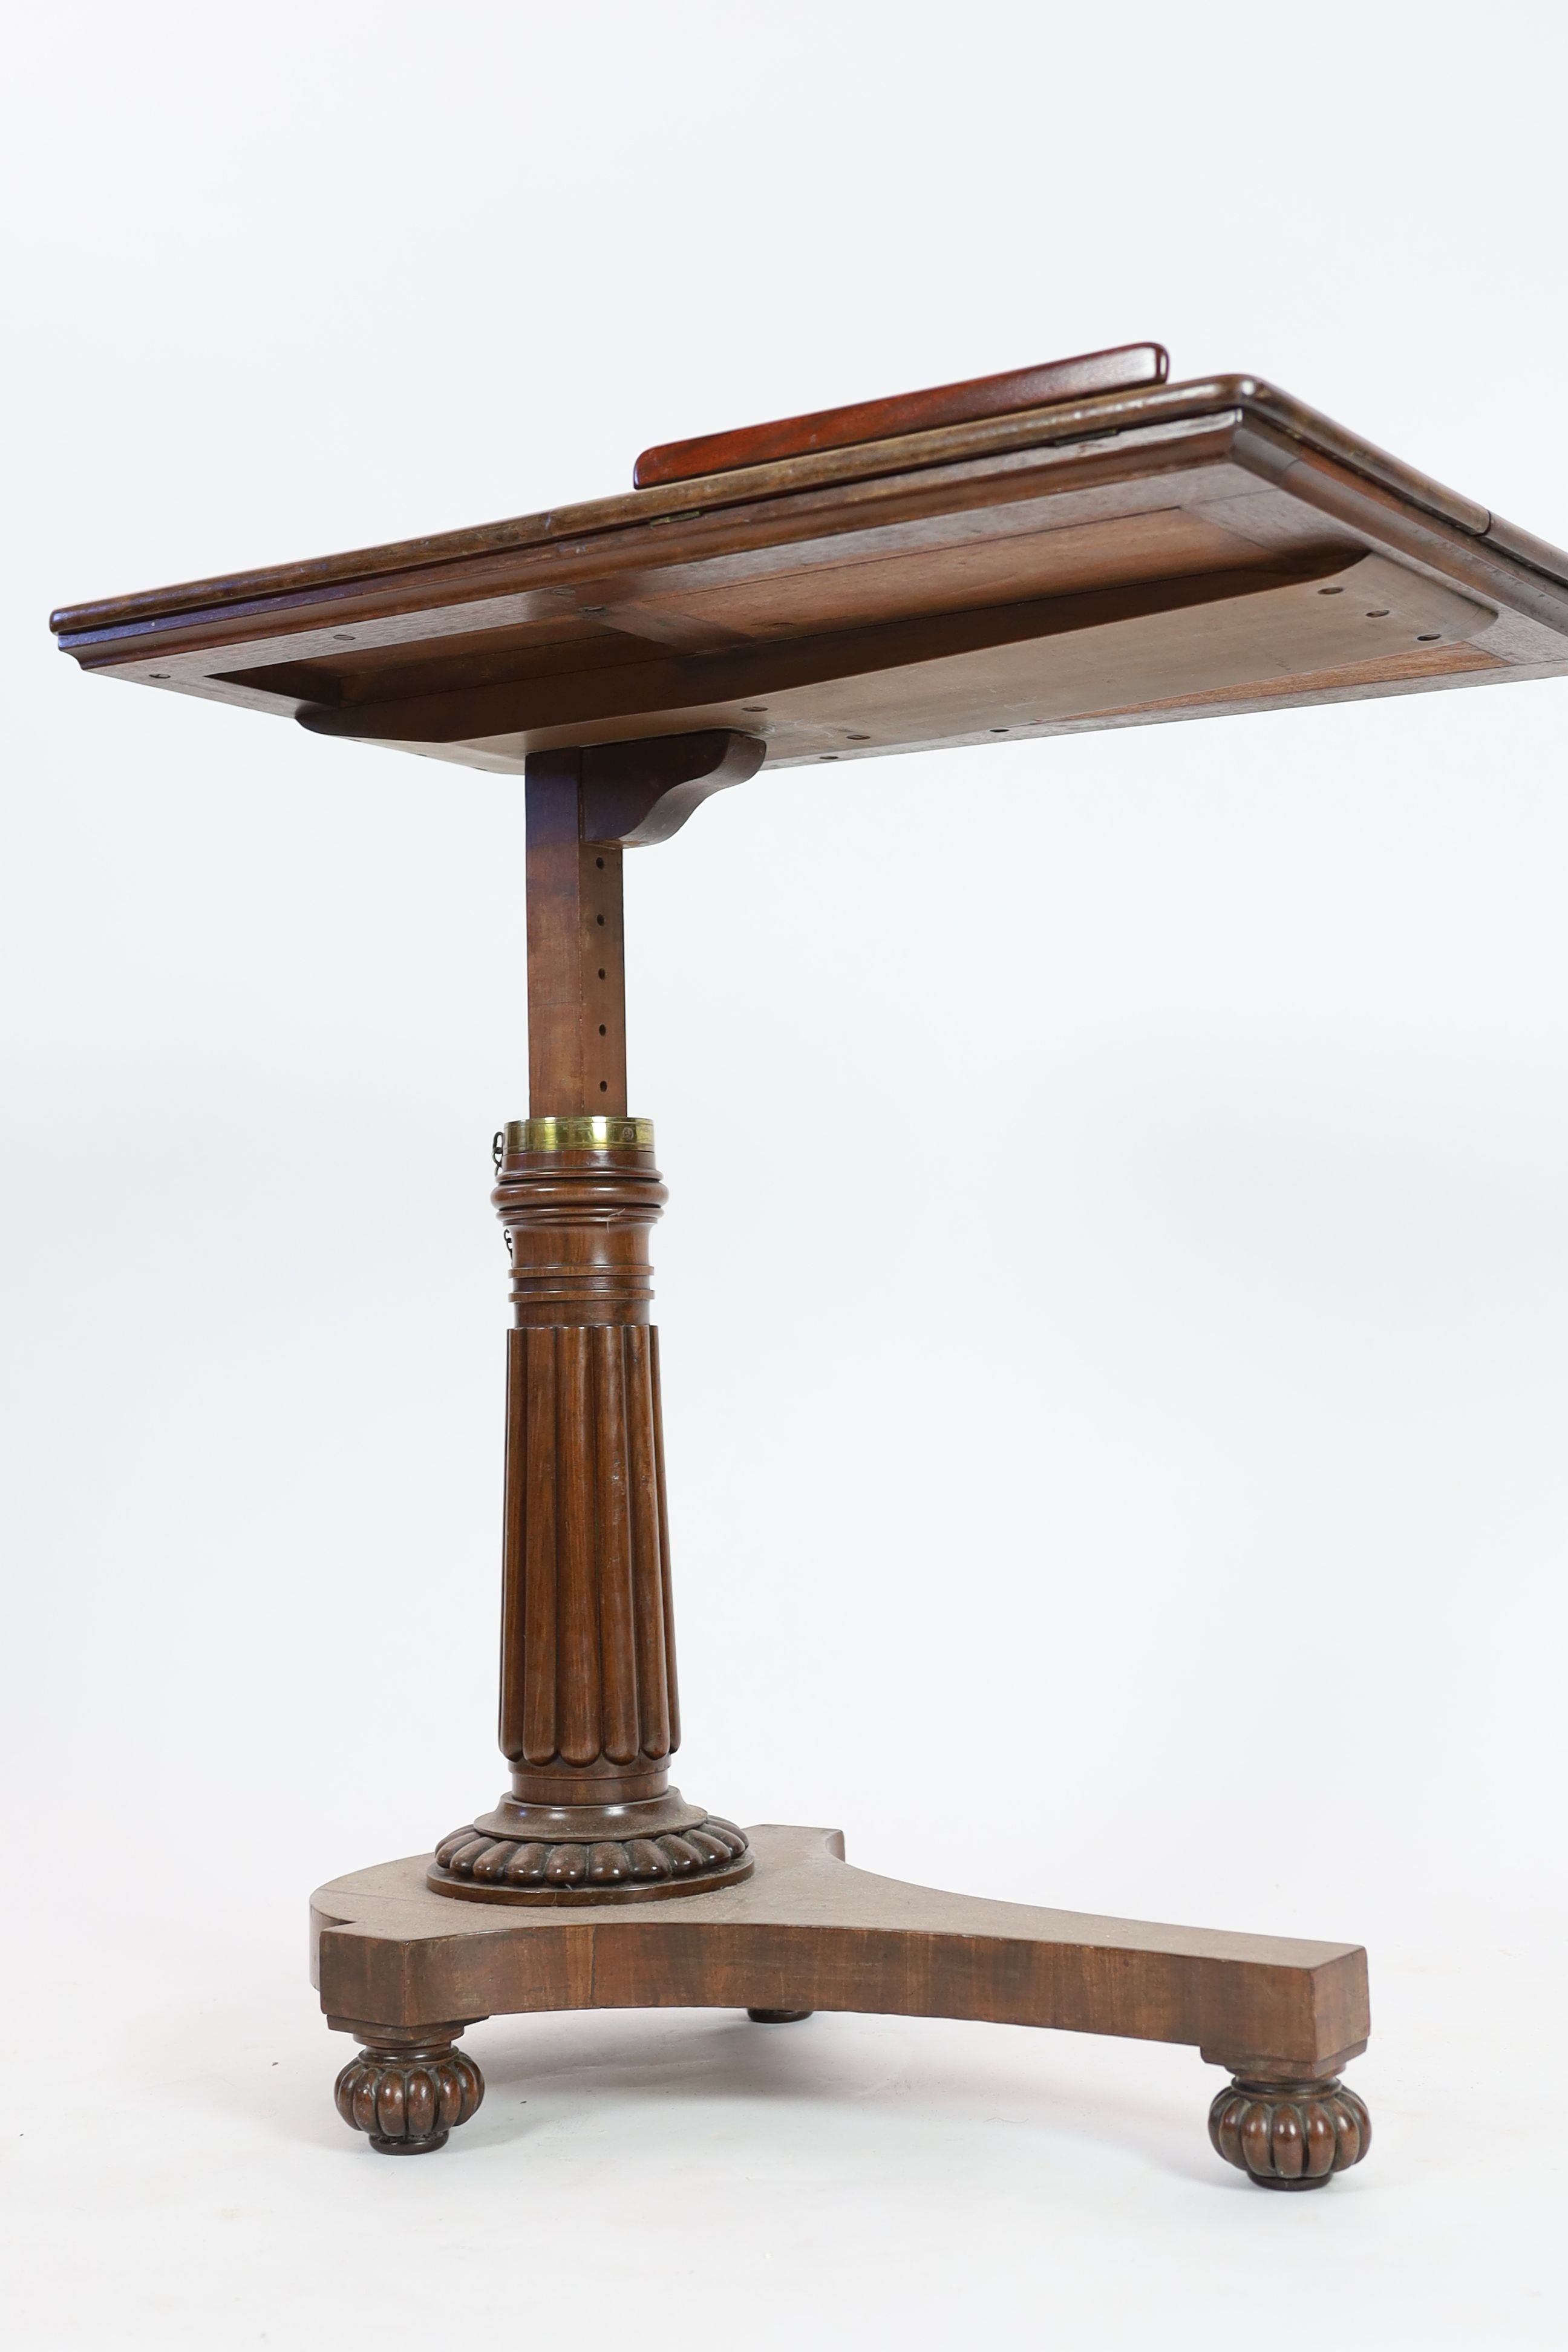 A Victorian mahogany adjustable reading table, with twin flap top, width 81cm depth 53cm